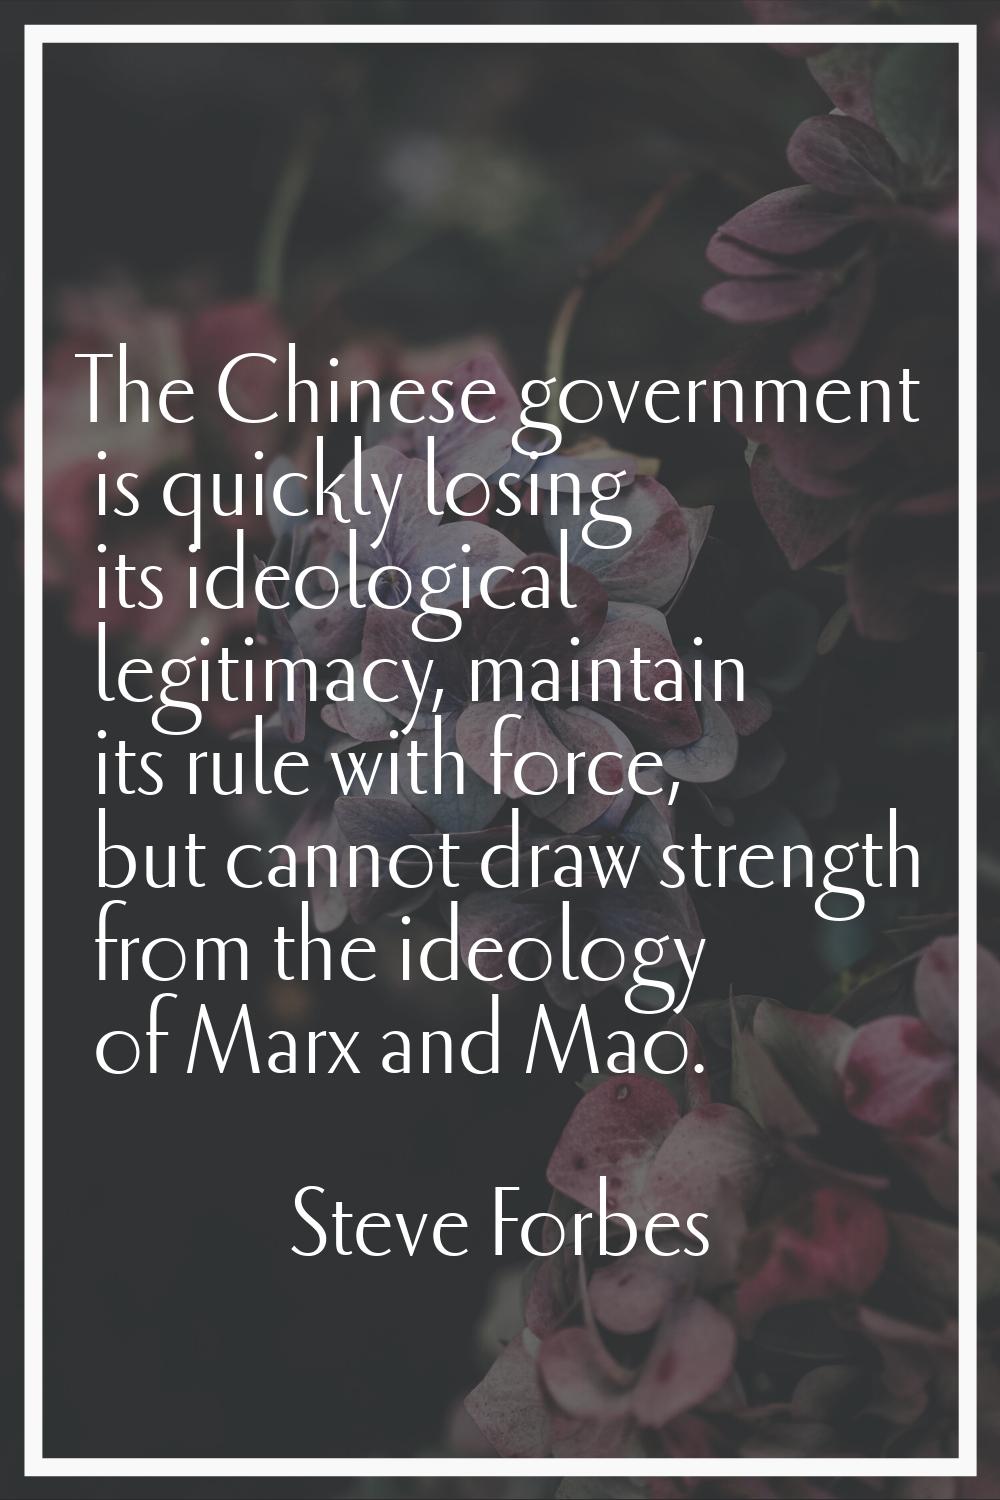 The Chinese government is quickly losing its ideological legitimacy, maintain its rule with force, 